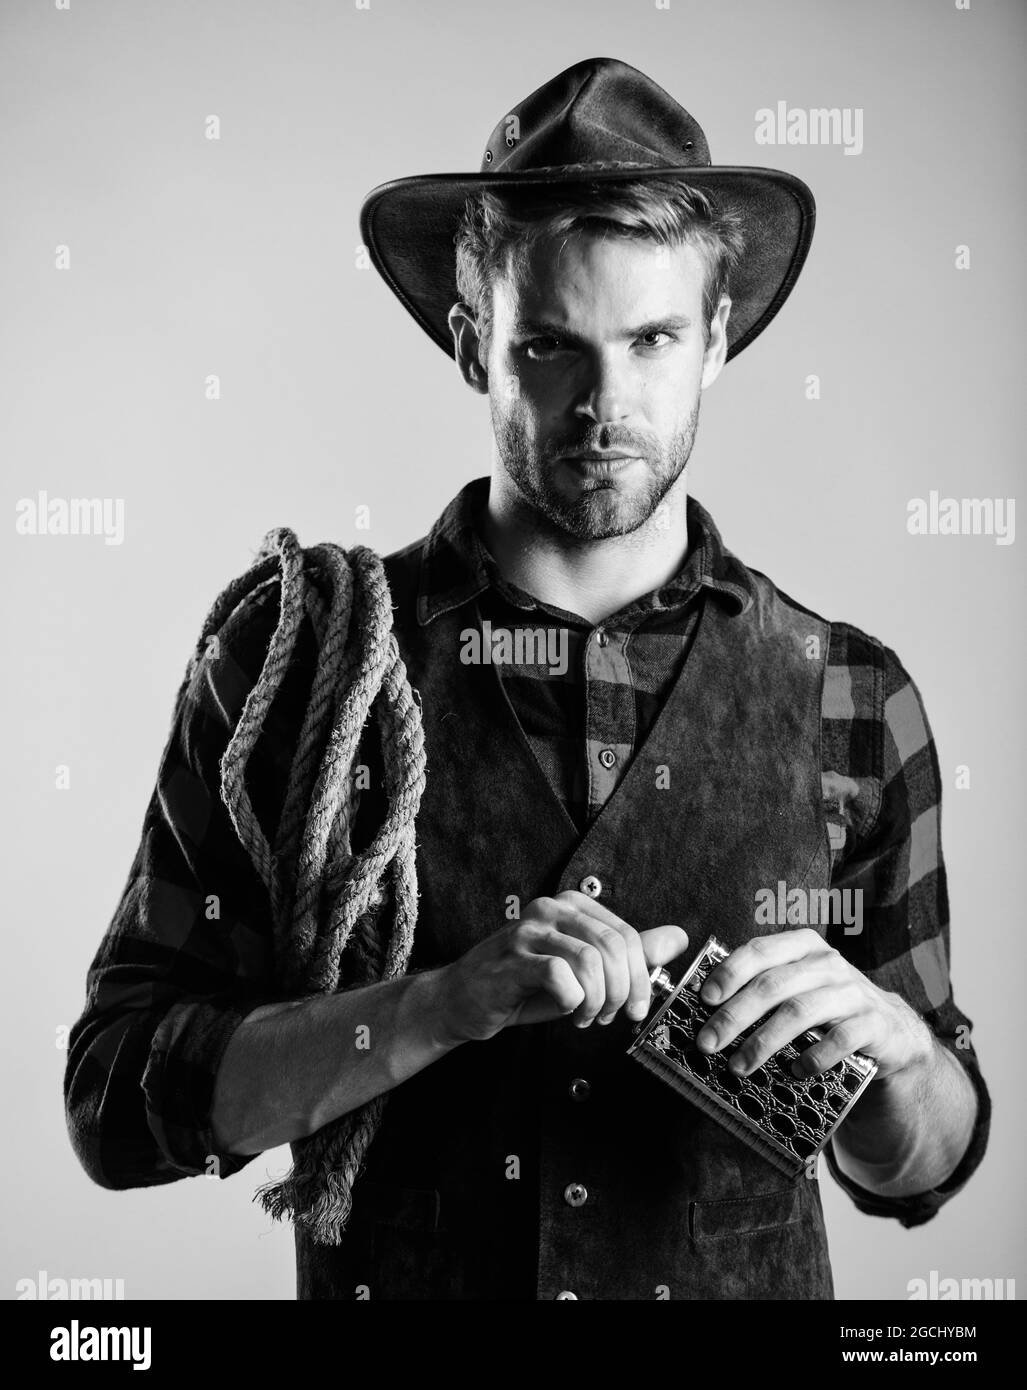 Western life. Sheriff concept. Bourbon whiskey. Western culture. Man wearing hat hold rope and flask. Lasso tool American cowboy. Brutal cowboy Stock Photo